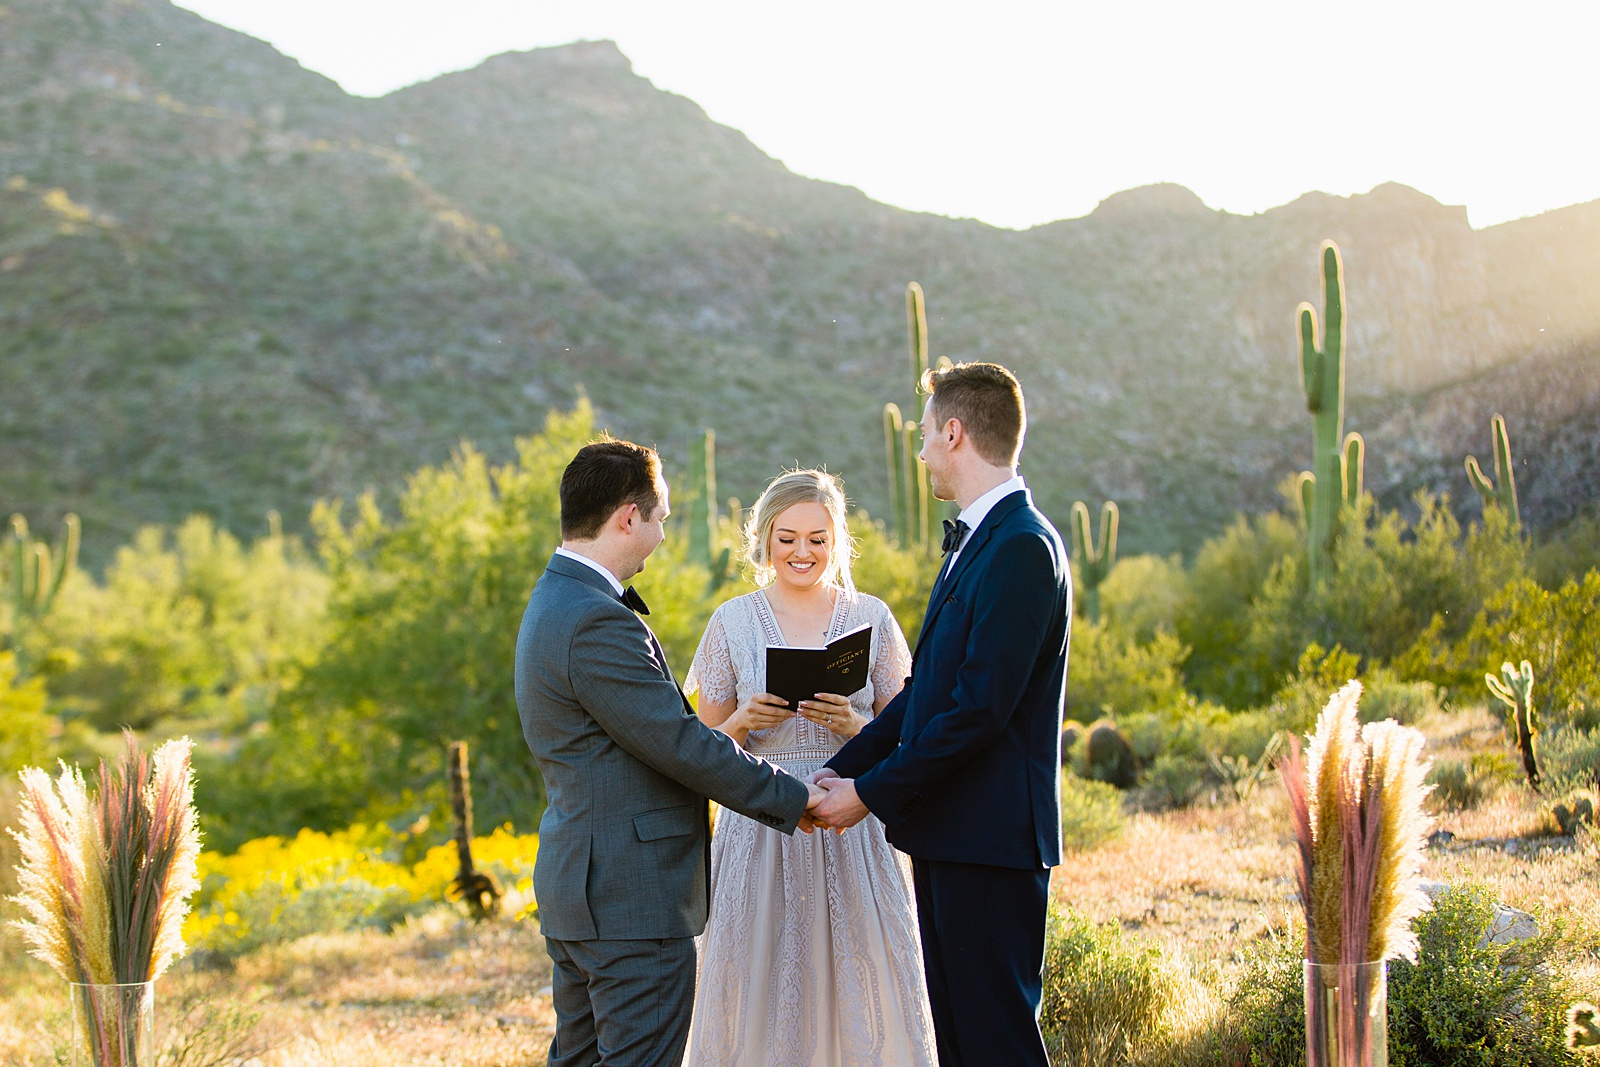 LGBTQ couple togethering during White Tanks wedding ceremony by Phoenix elopement photographer PMA Photography.